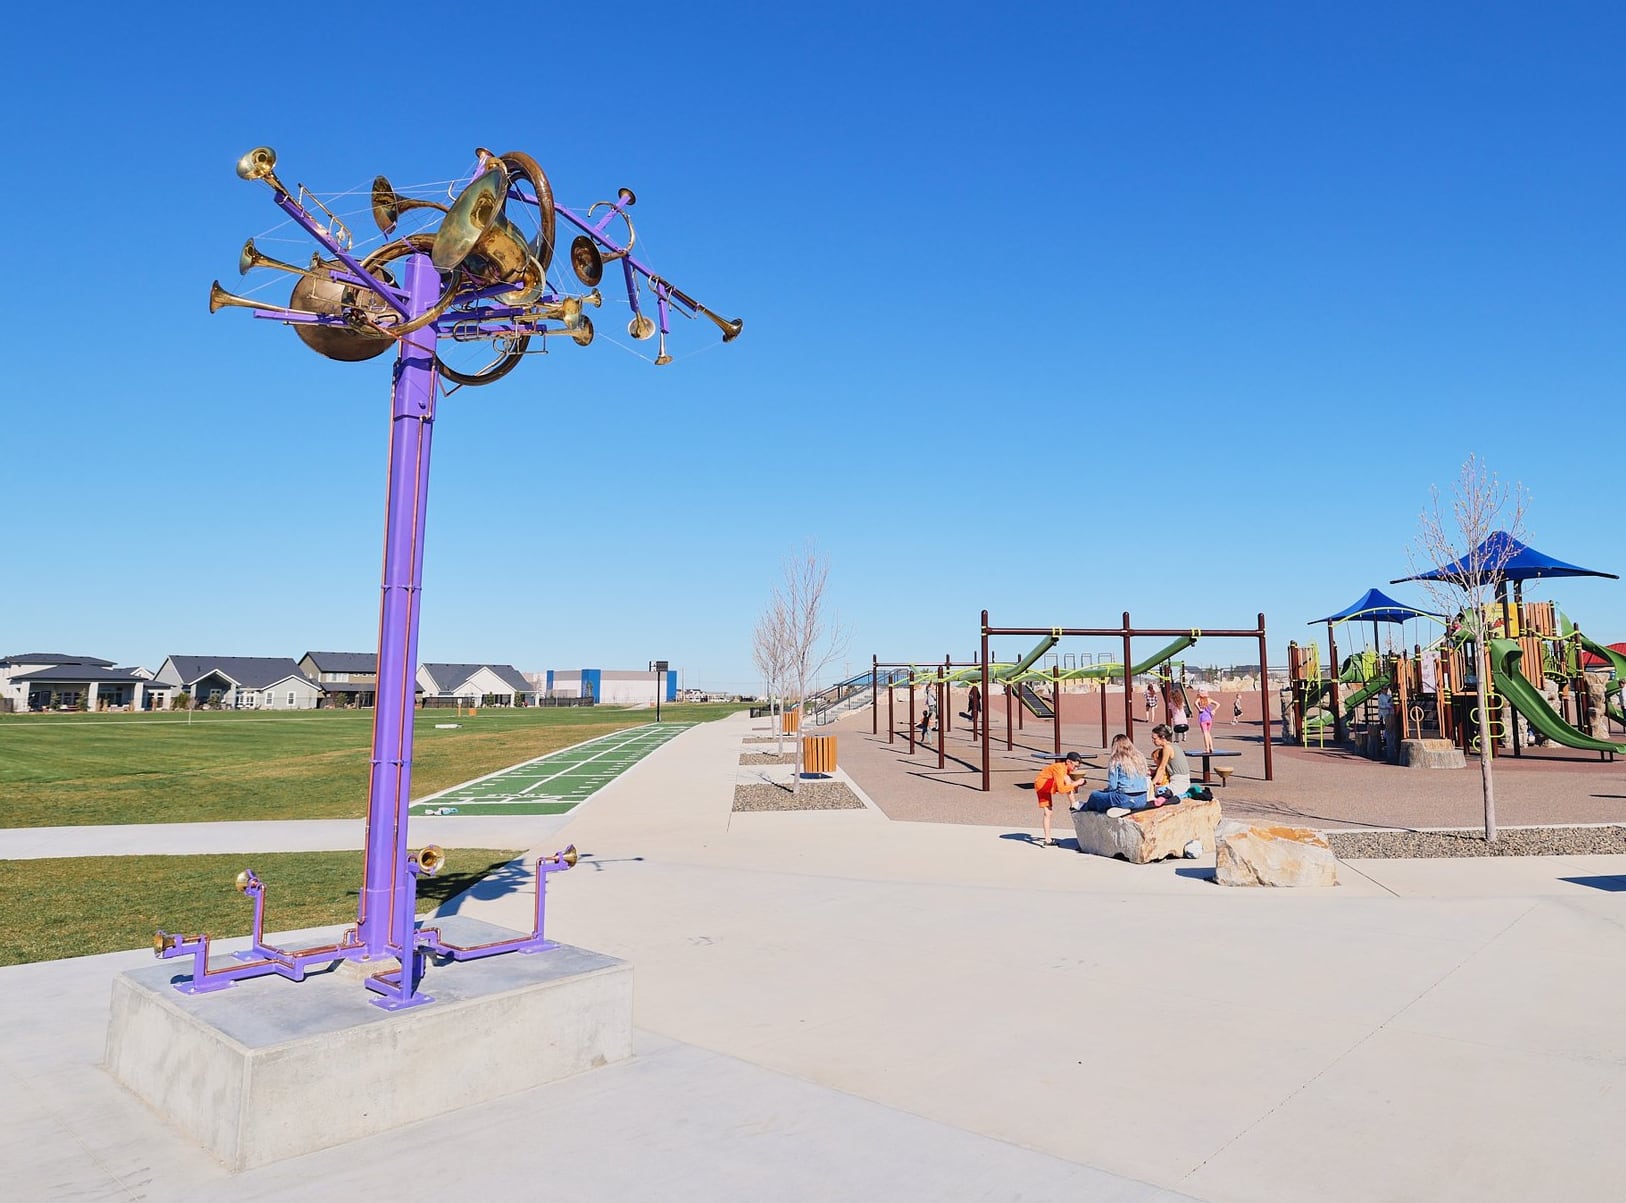 a cluster of brass instruments atop a purple pole near a playground